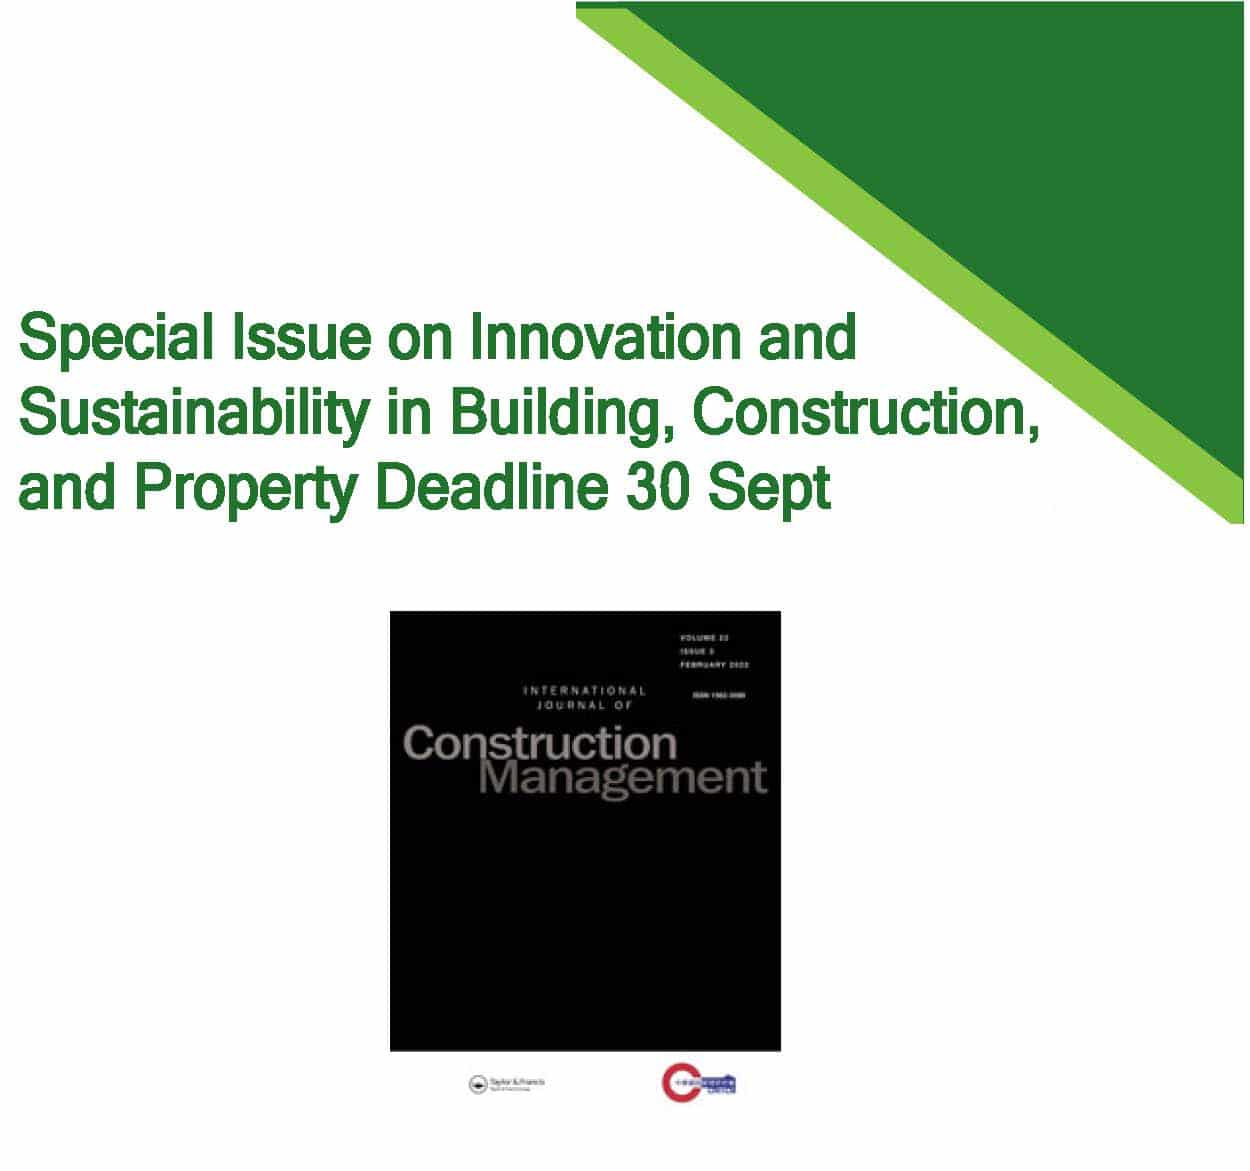 Call for Papers: Special Issue on Innovation and Sustainability in Building, Construction, and Property 30 Sept